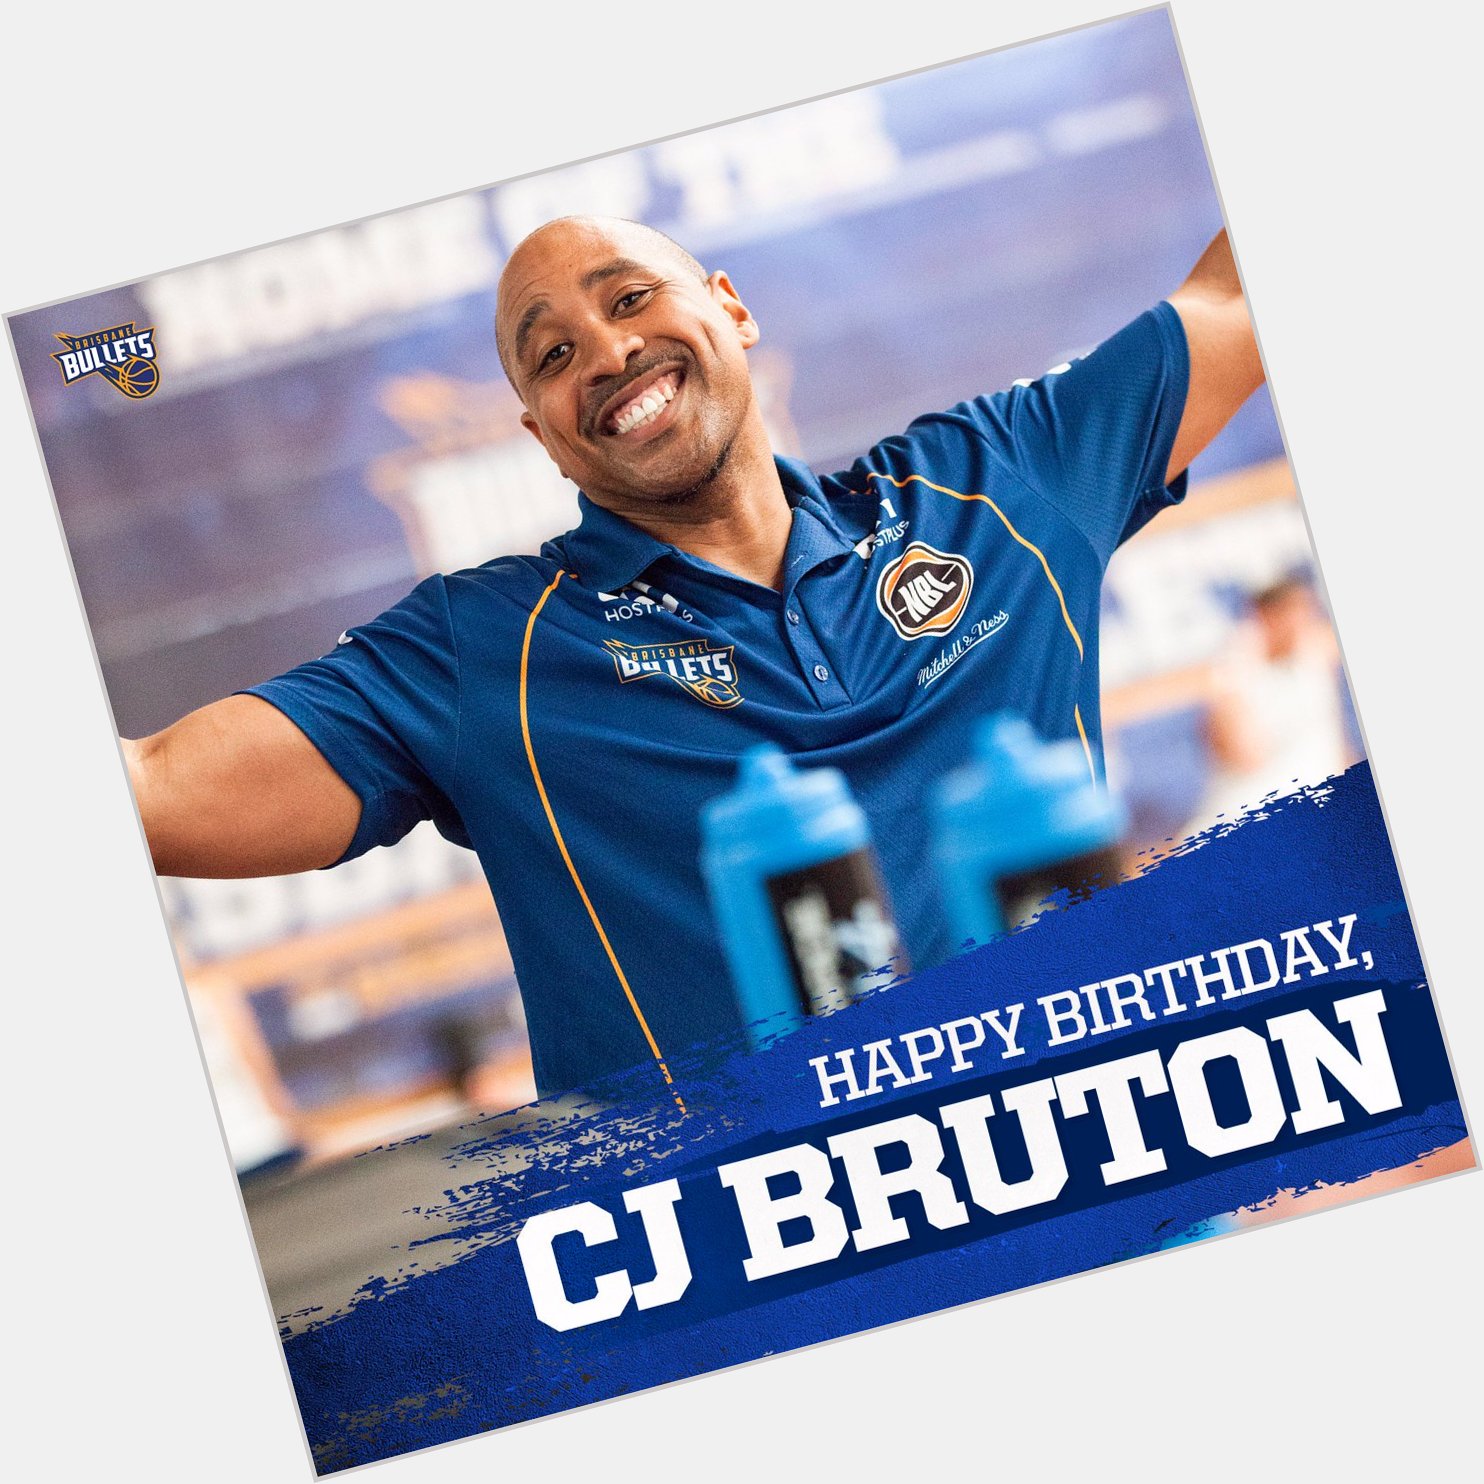 A massive shout-out to the one and only, CJ BRUTON! Happy Birthday CJ    